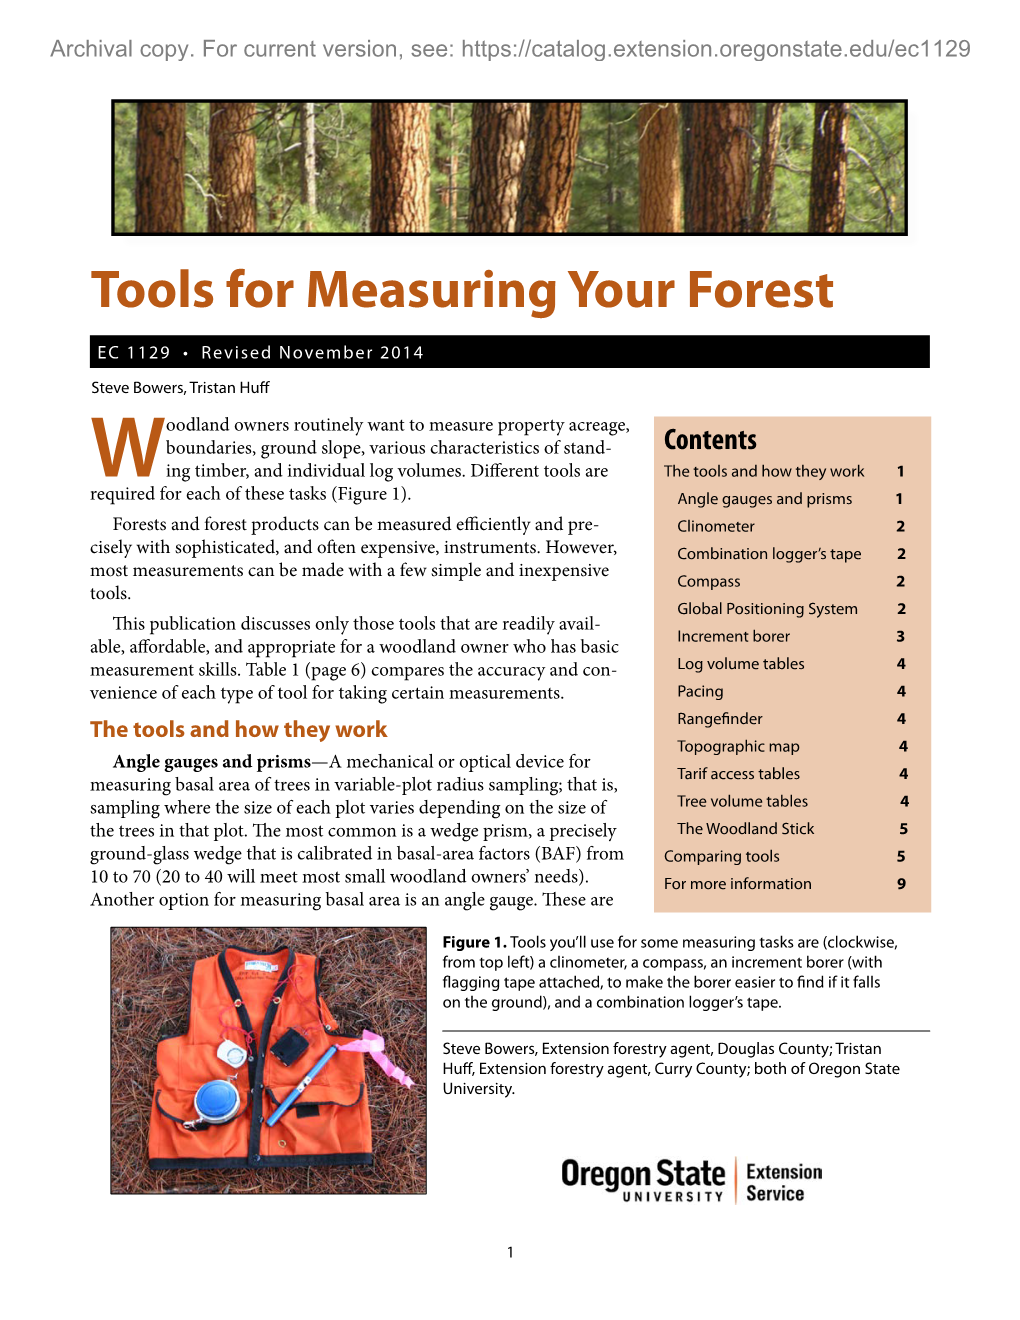 Tools for Measuring Your Forest